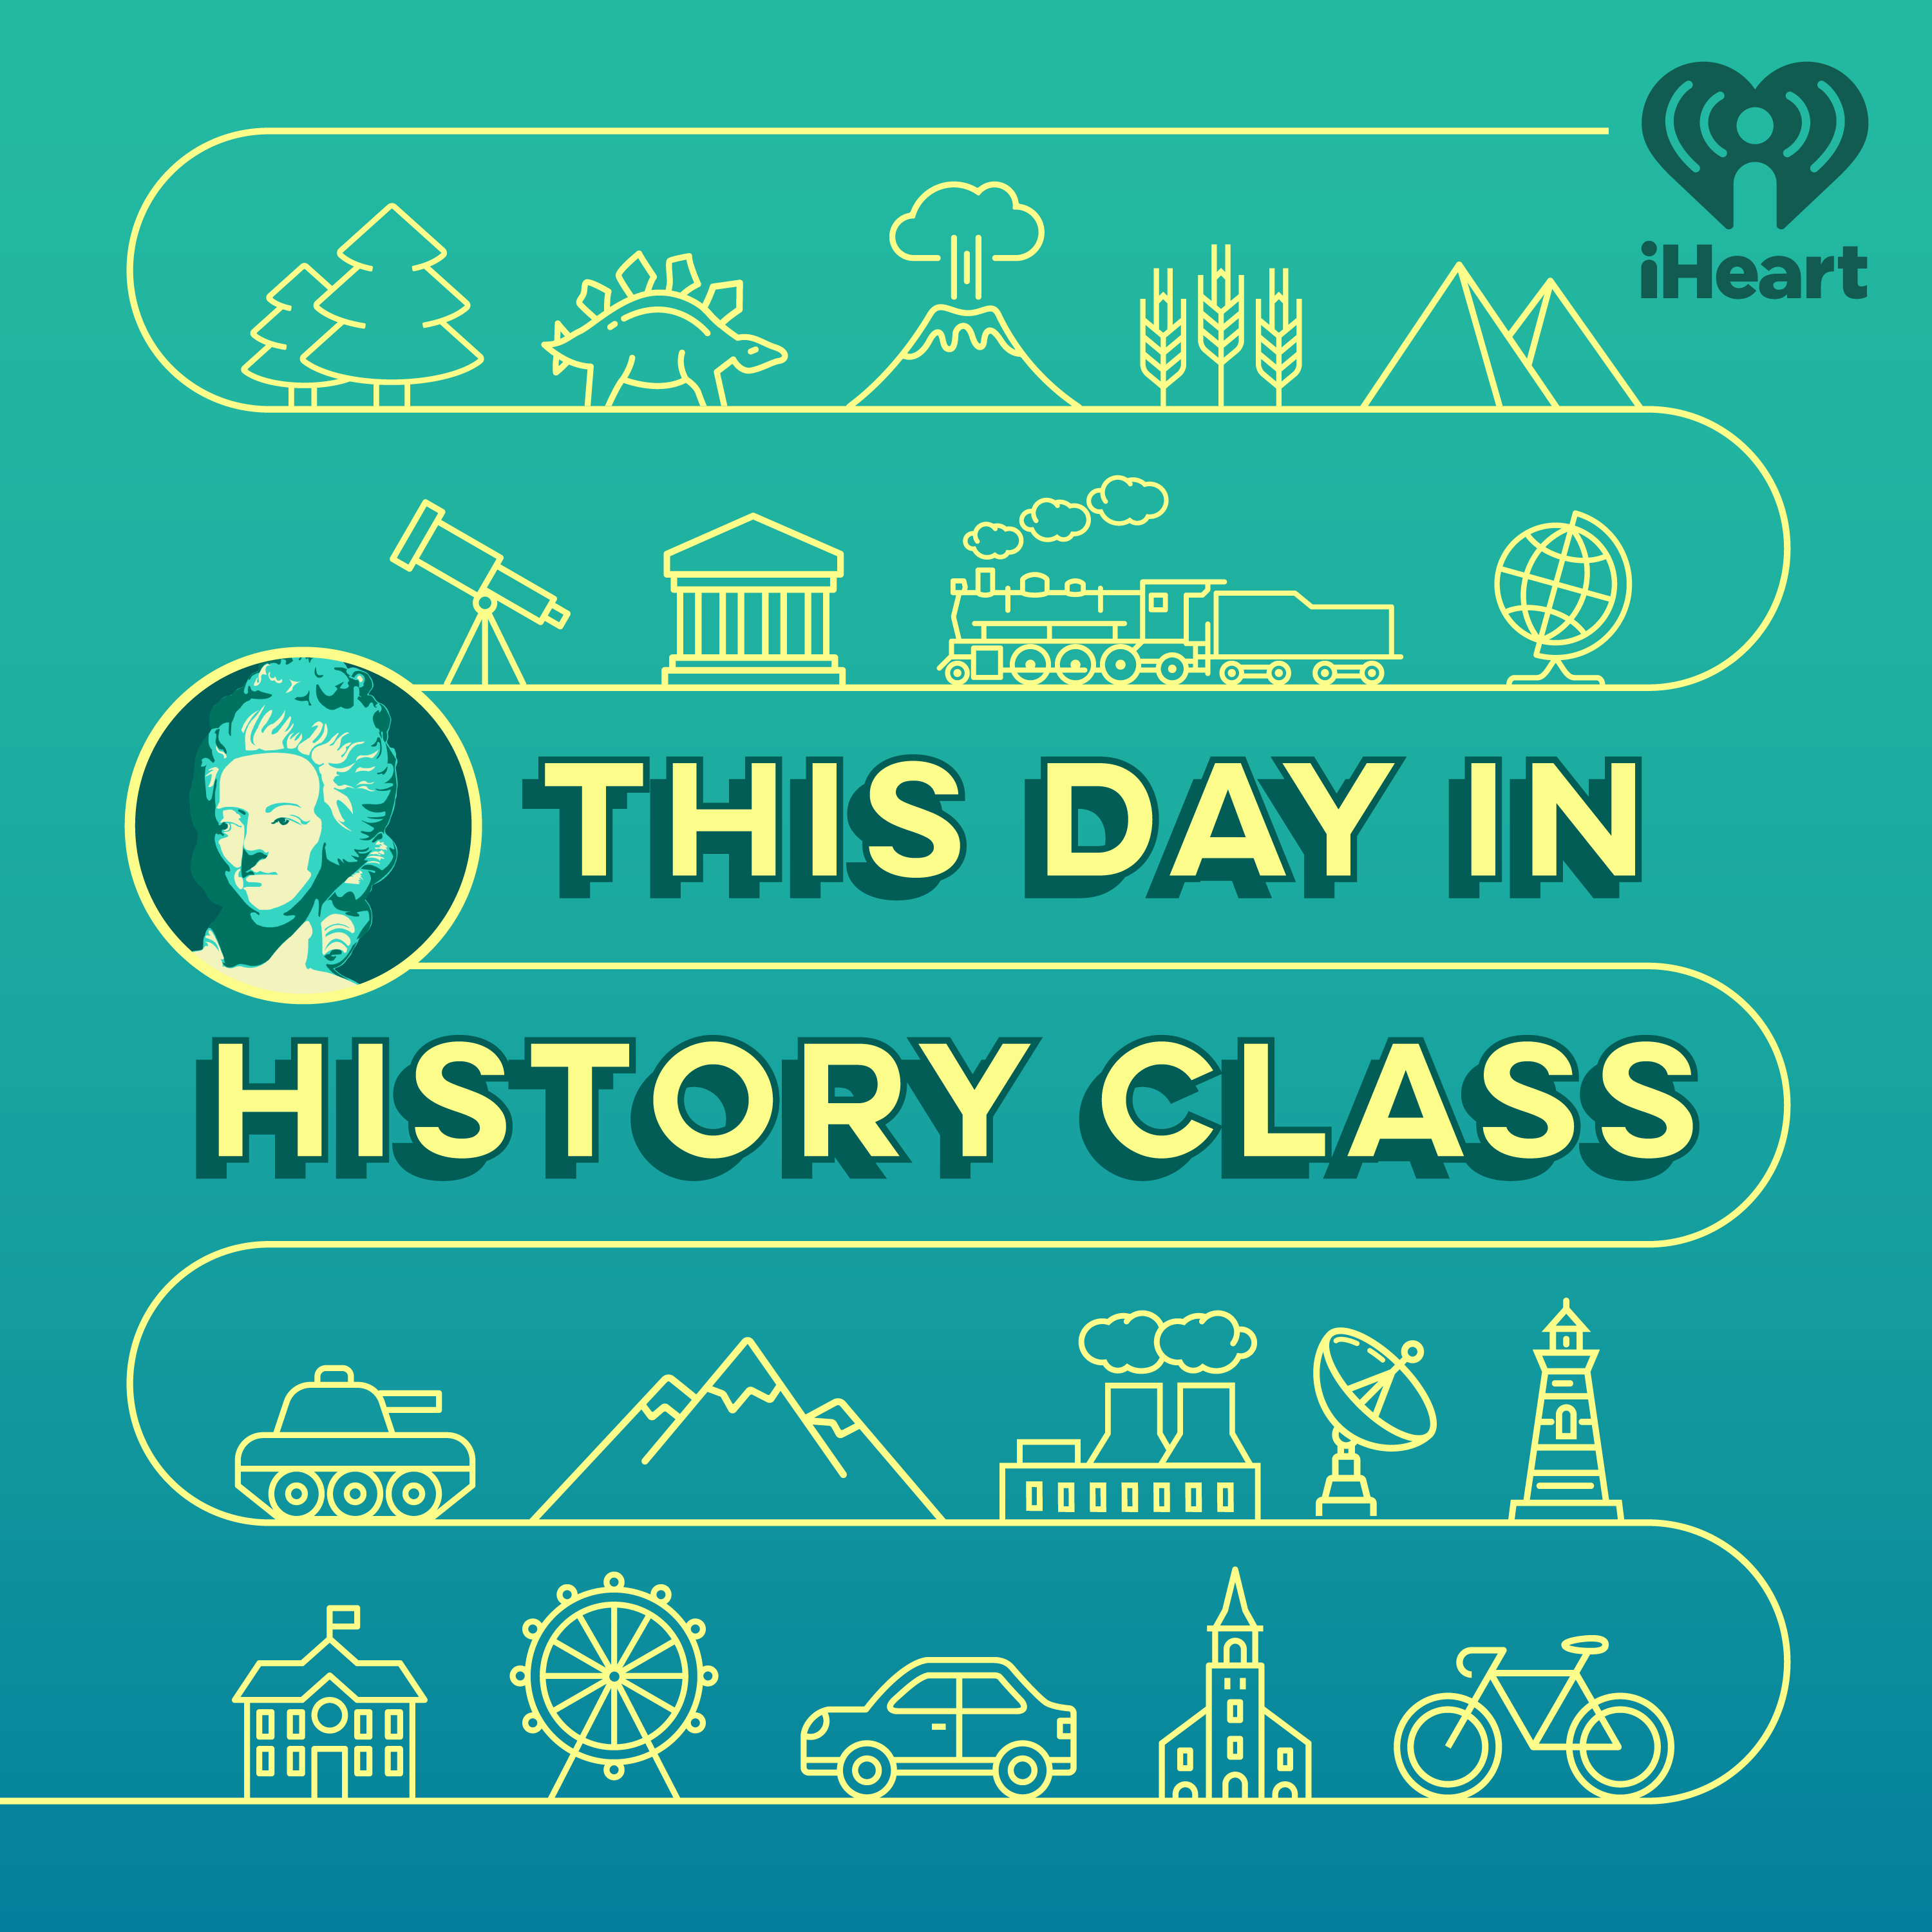 This Day In History Class - December 8th